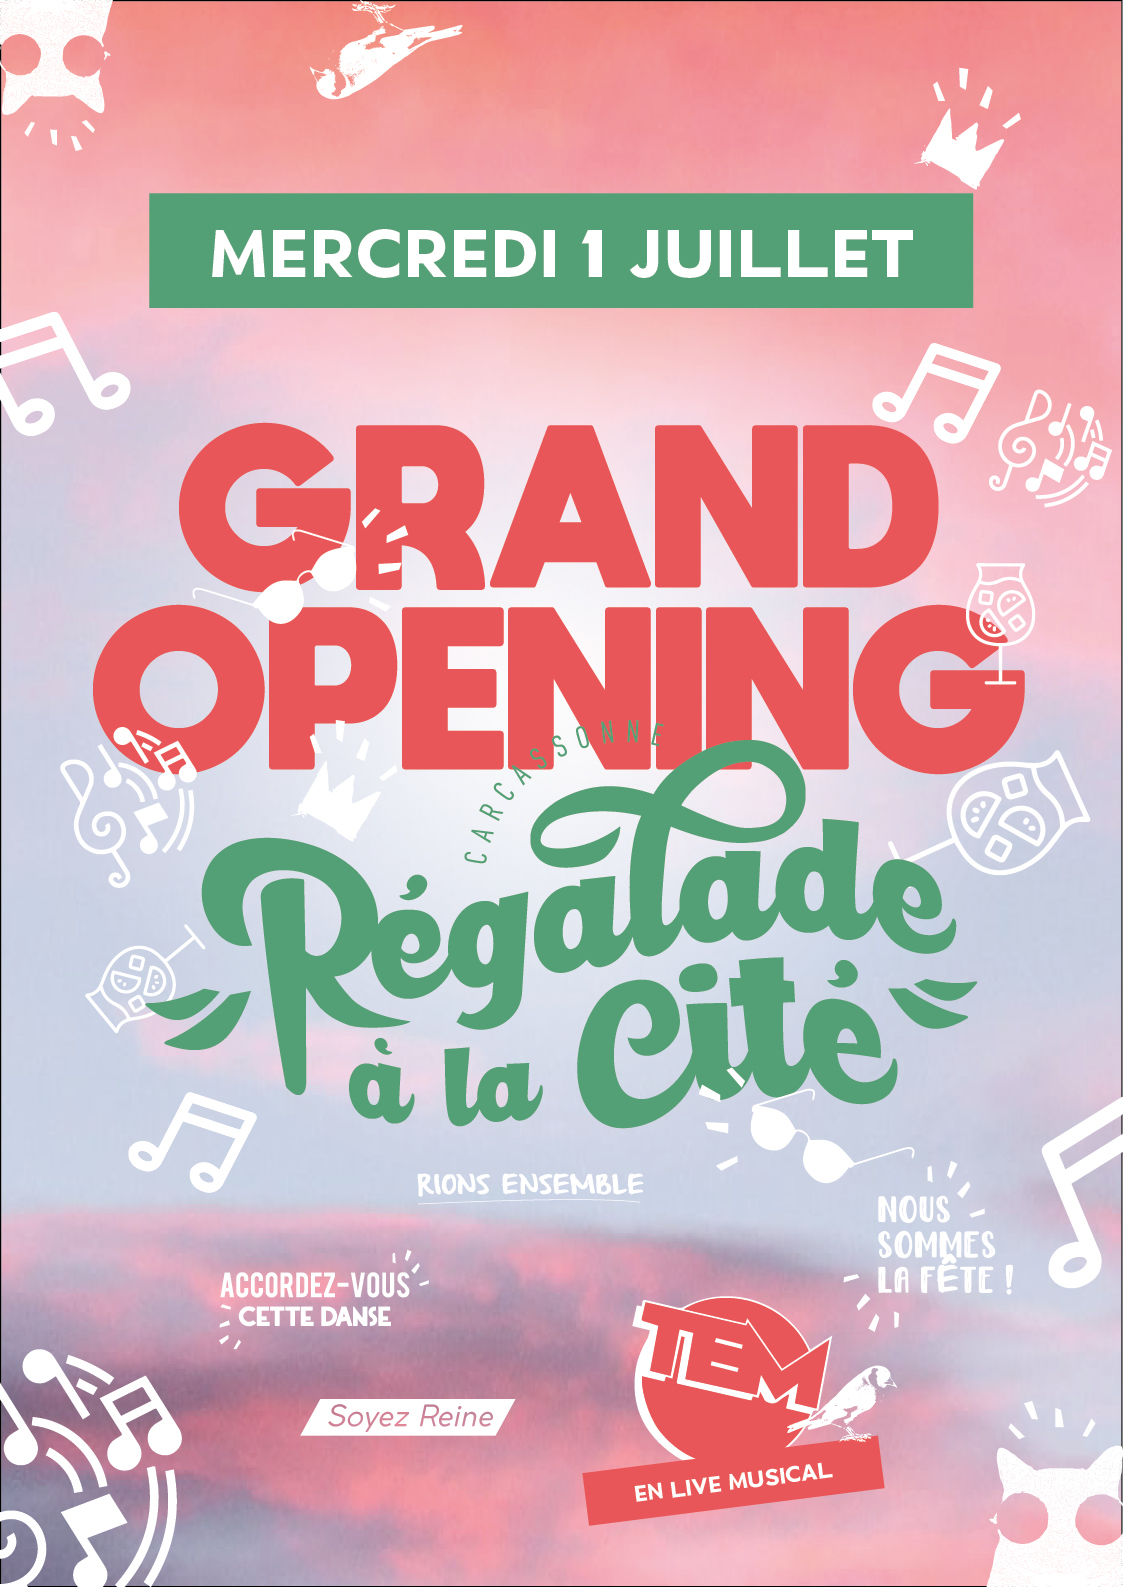 AFFICHE OPENING 2020 